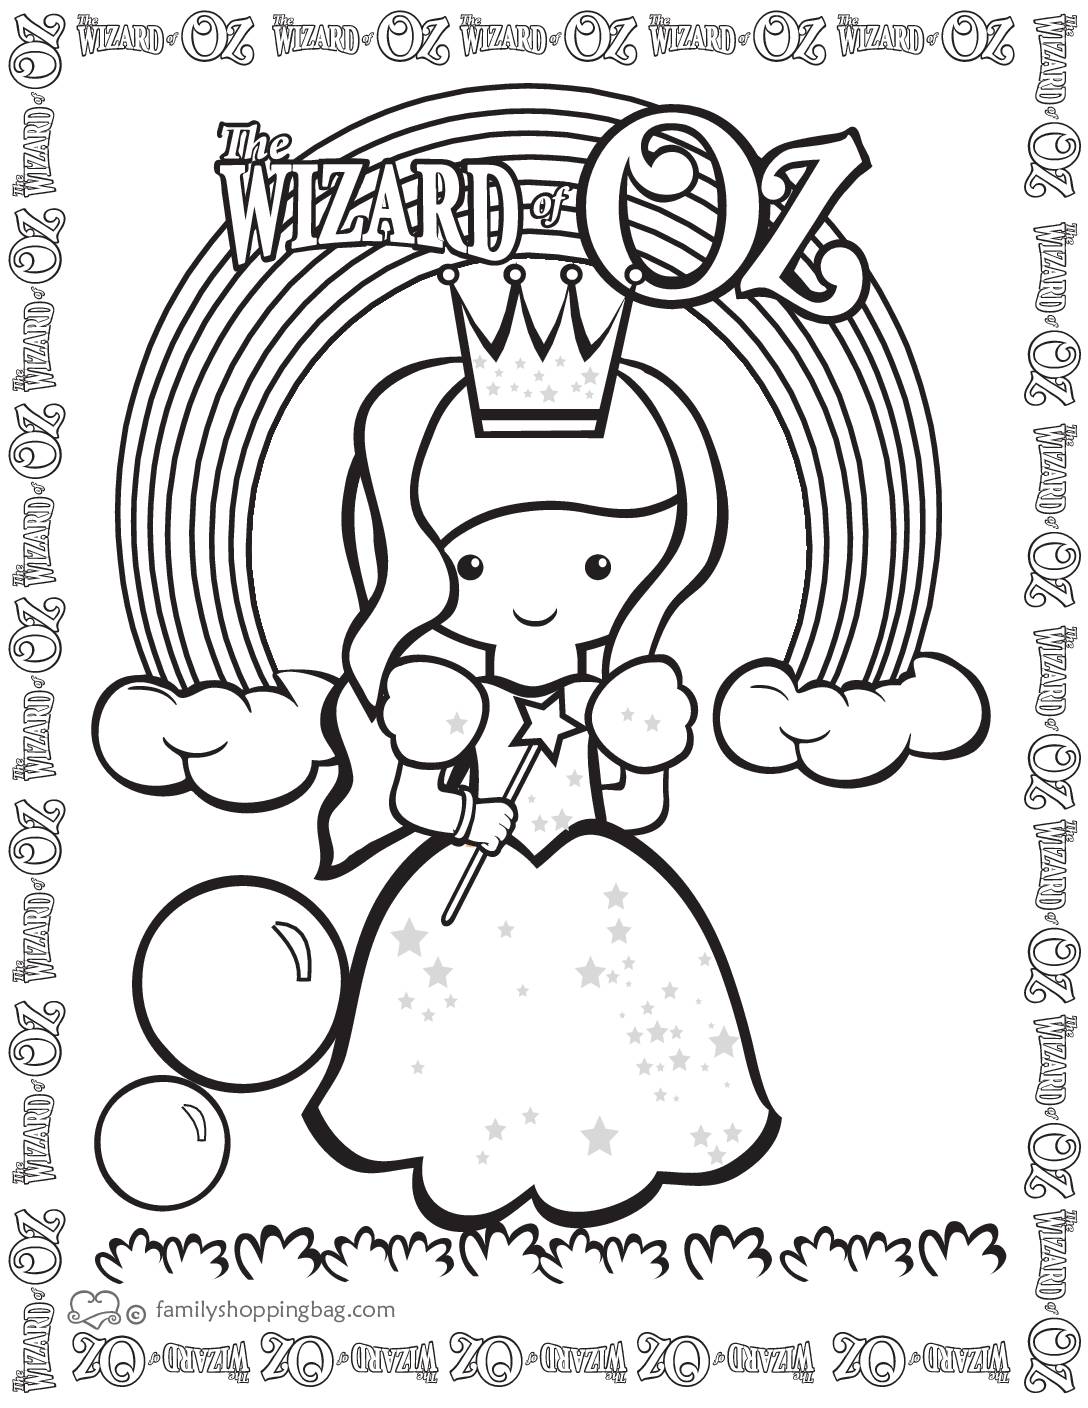 Coloring Page 5 Wizard of Oz